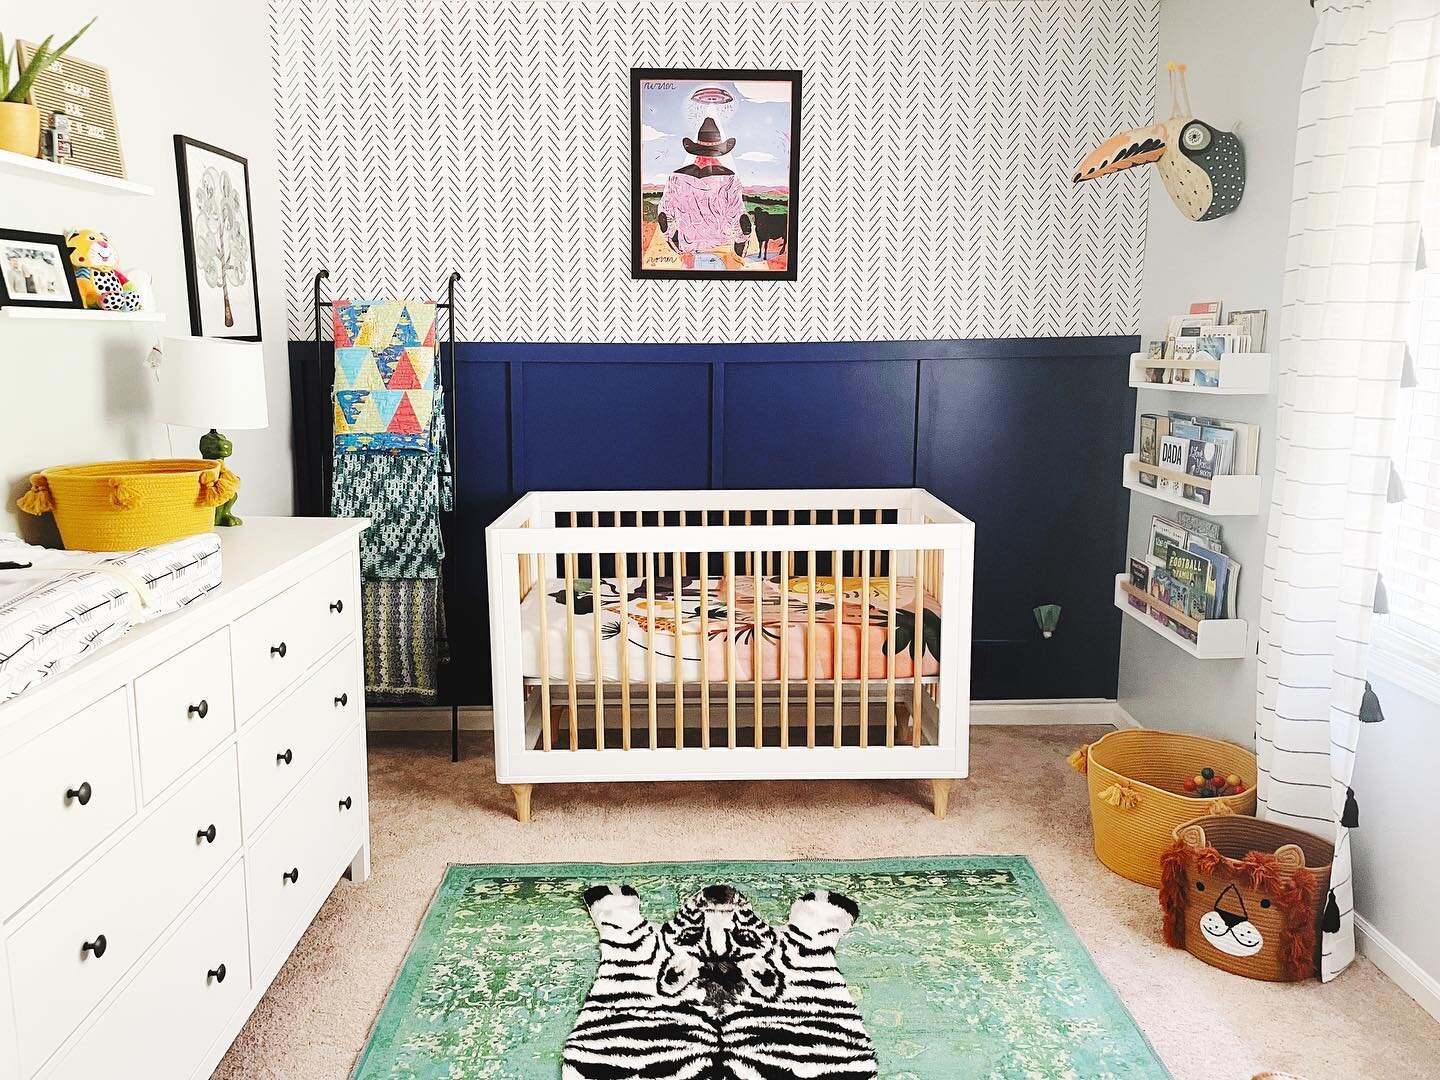 An eclectic nursery for our new baby boy. Did you know babies see B&amp;W objects best due to its stark contrast? So I added fun black and white elements like the wallpaper and curtains with bold pops of color for our infants developing eyes. When de